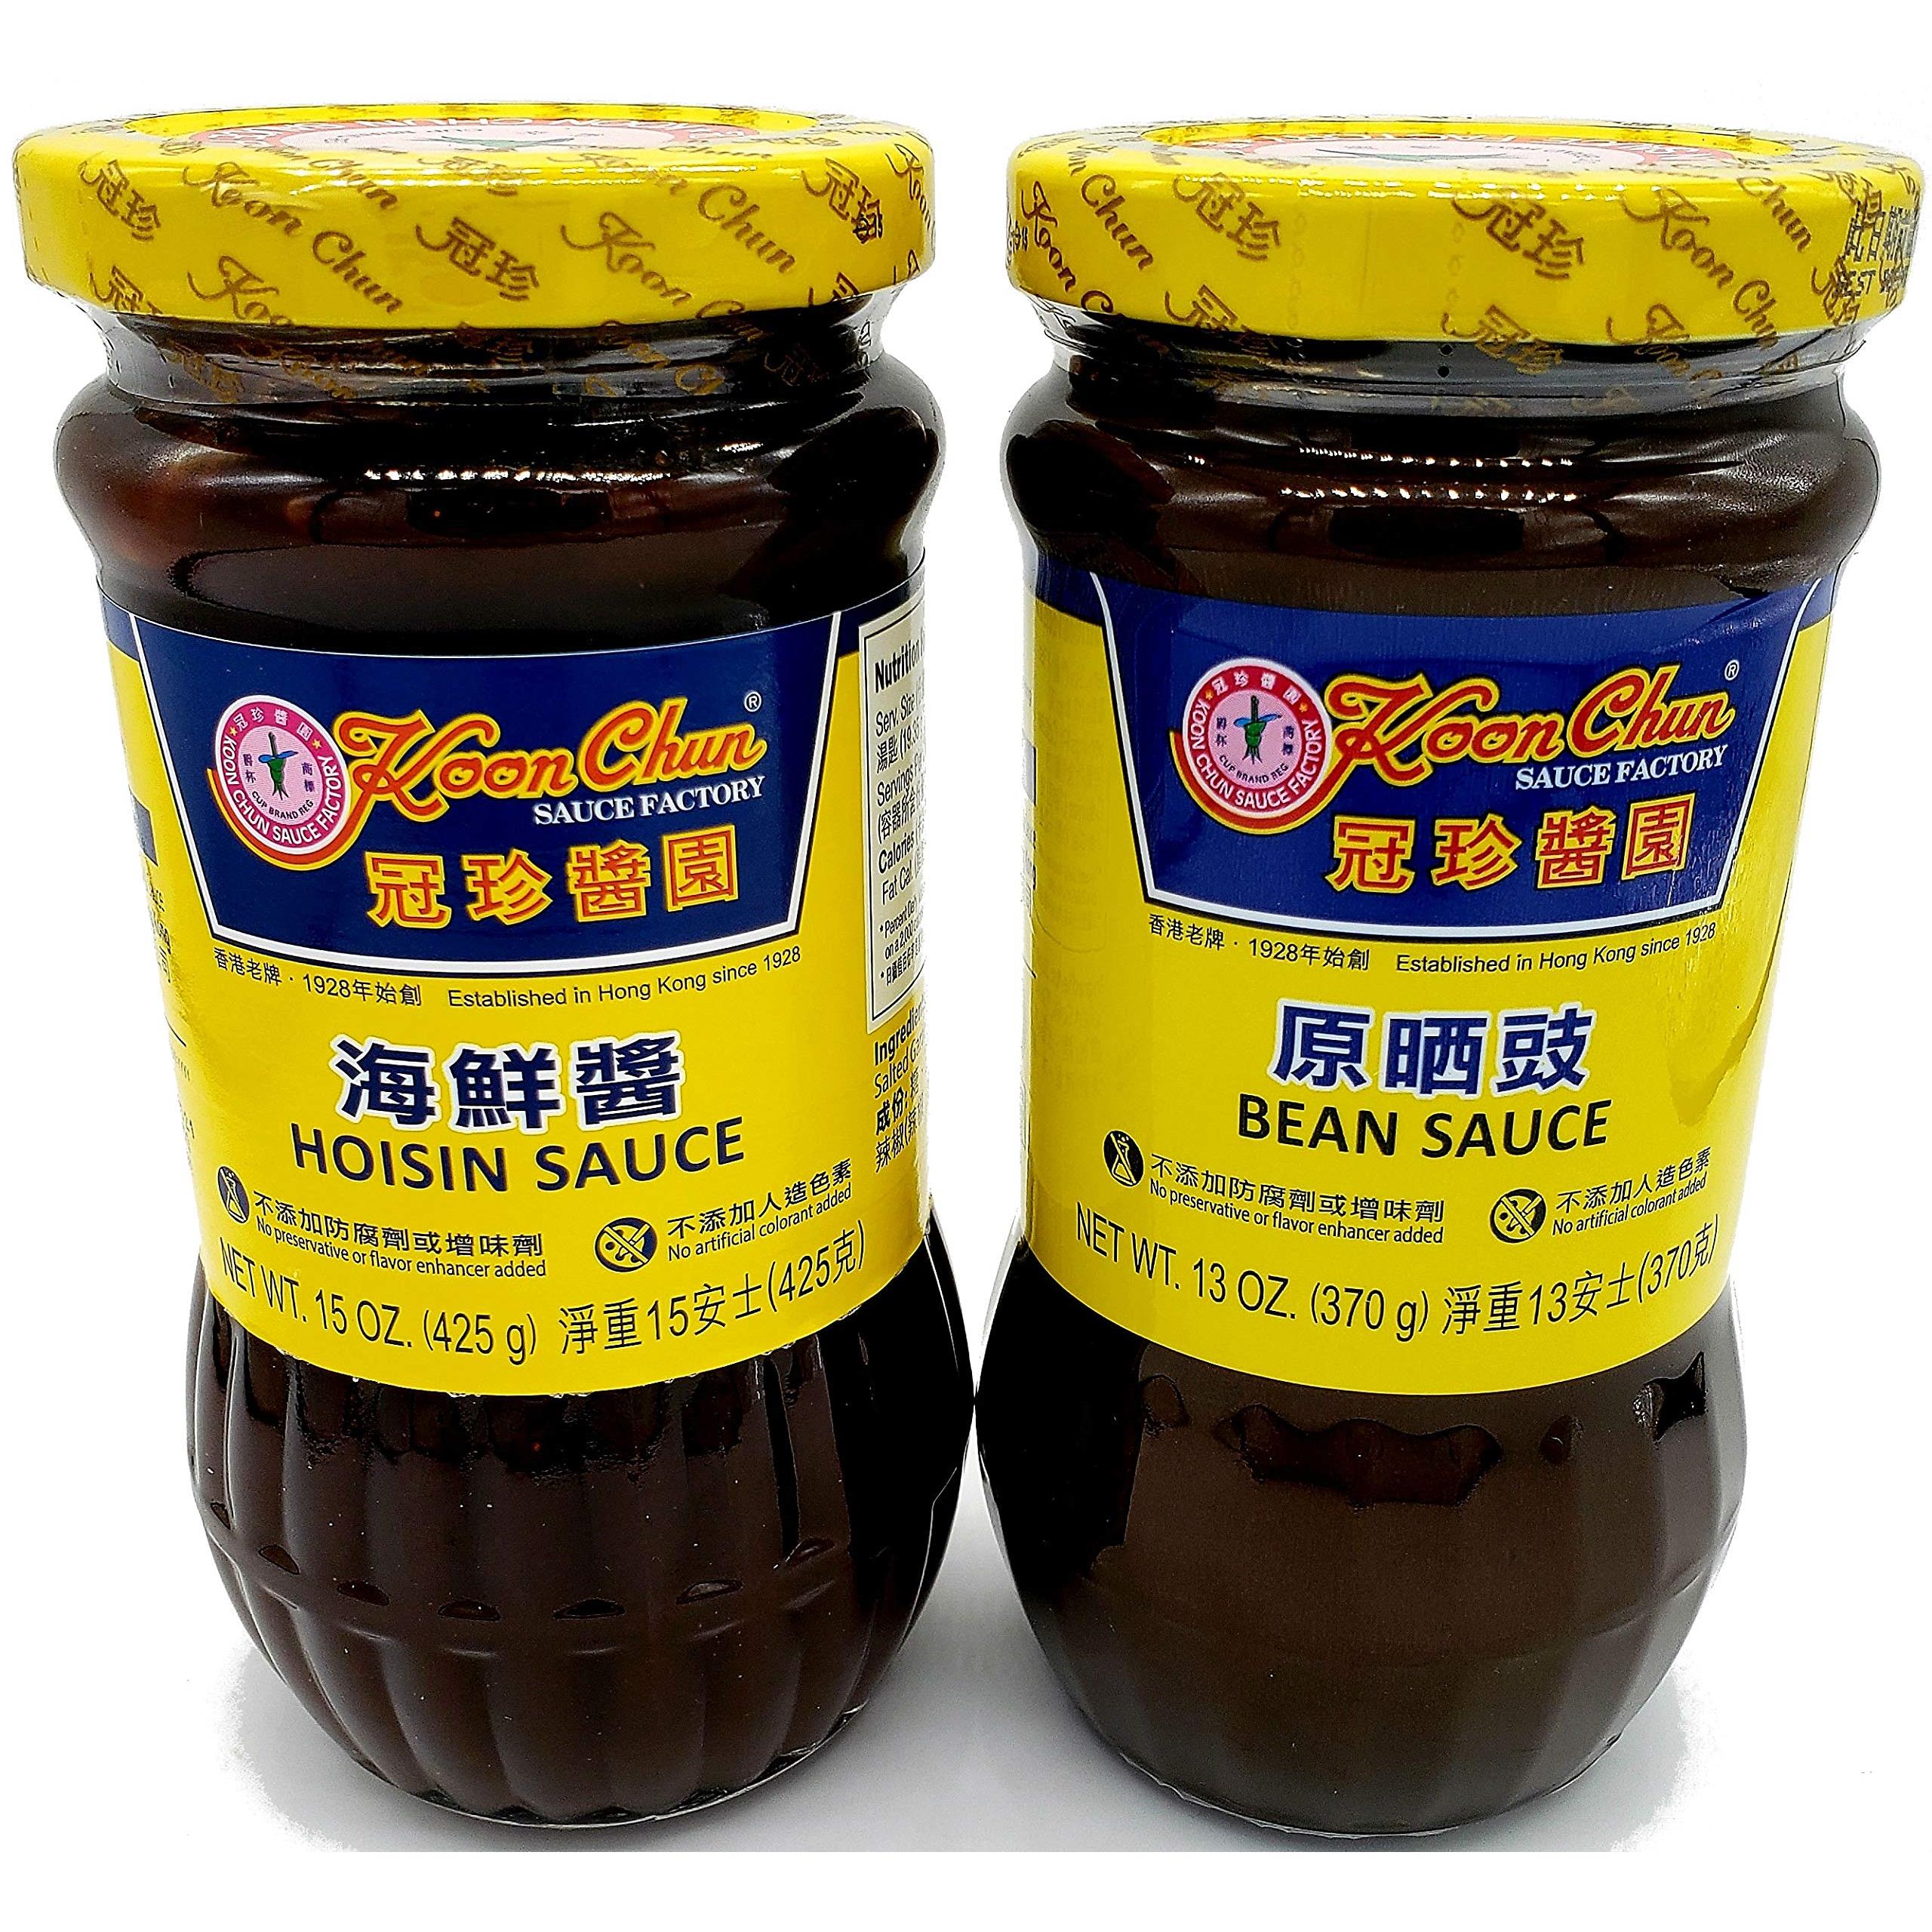 Koon Chun Hoisin and Bean Sauce Combination Pack | Chinese Sauces and Condiments | Authentic Flavor